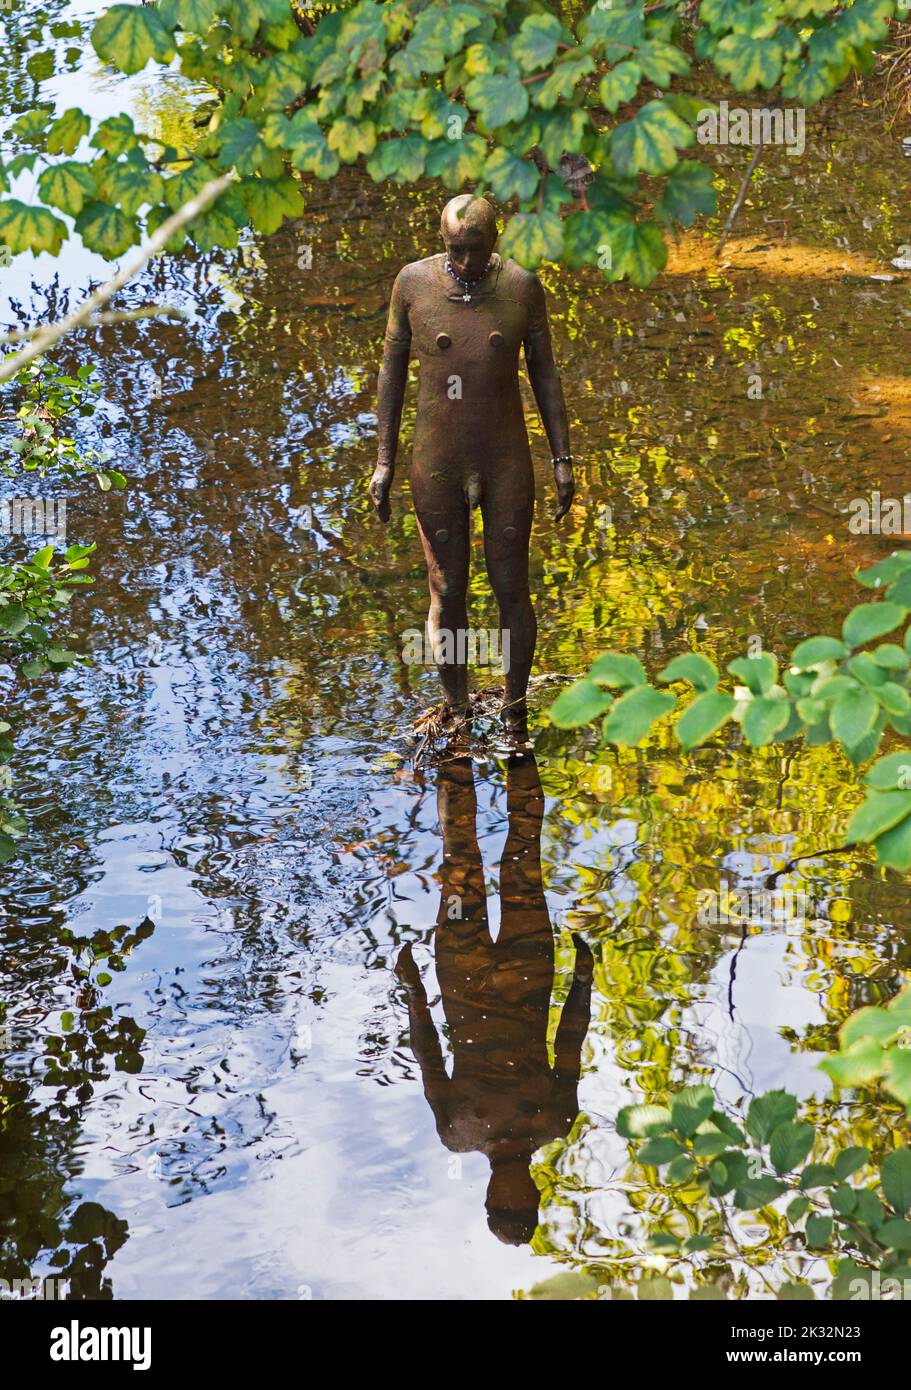 Stockbridge, Edinburgh Scotland, UK. 24th September 2022. Morning sunshine after a cloudy start to the day, temperature mid morning around 9 degrees rising to 13 degrees by lunchtime. Pictured: At Stockbridge, one of the six 'Six Times' Anthony Gormley statues cited in or near the water of Leith. Credit: Arch White/alamy live news. Stock Photo